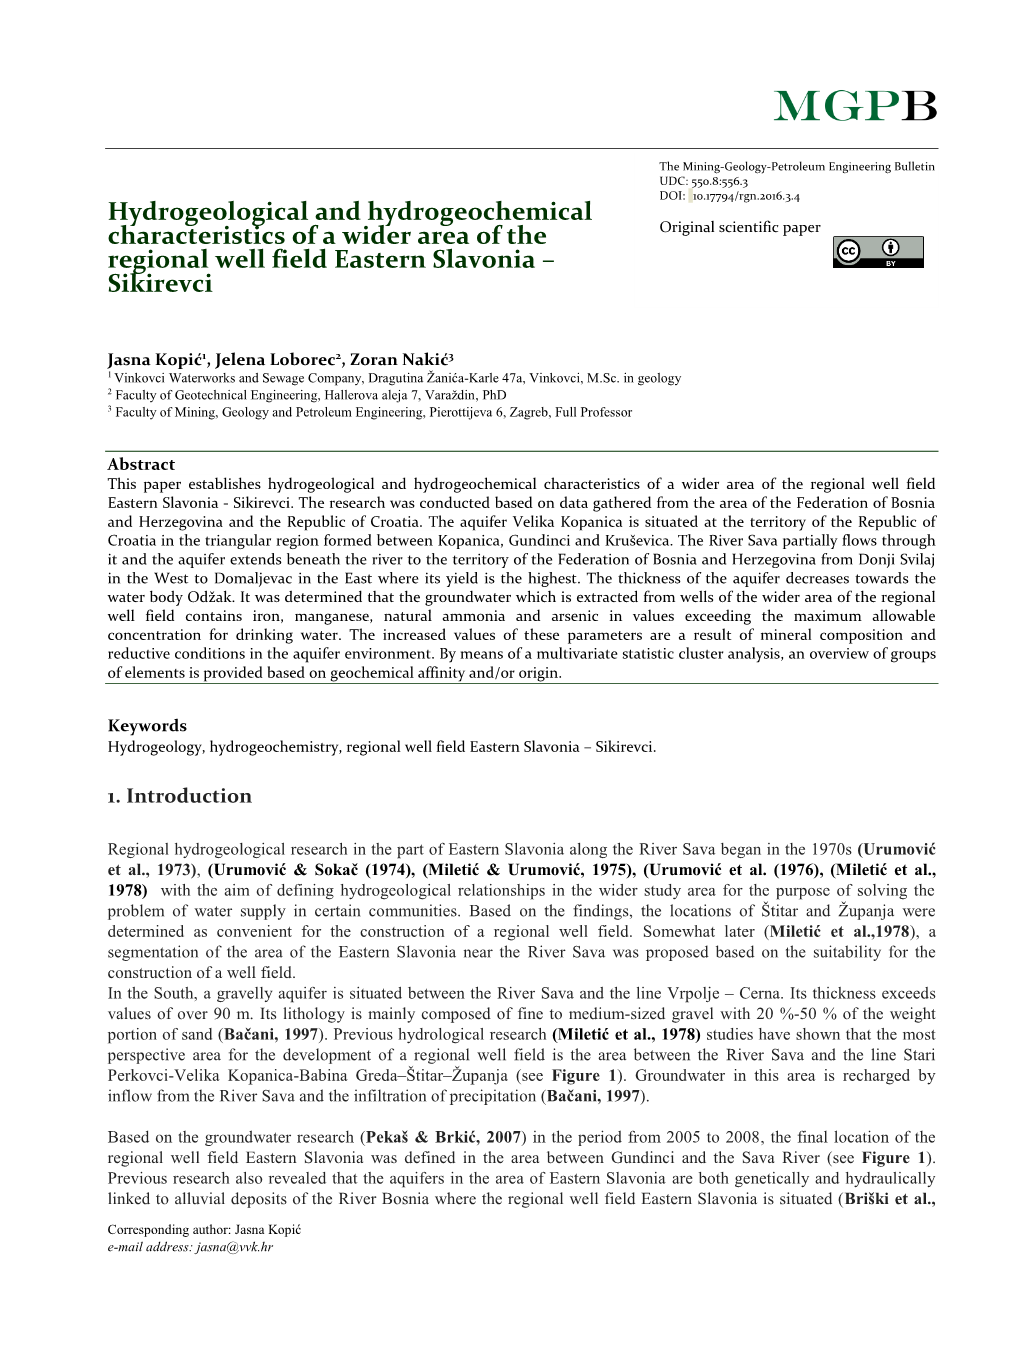 Hydrogeological and Hydrogeochemical Characteristics of a Wider Area of the Original Scientific Paper Regional Well Field Eastern Slavonia – Sikirevci